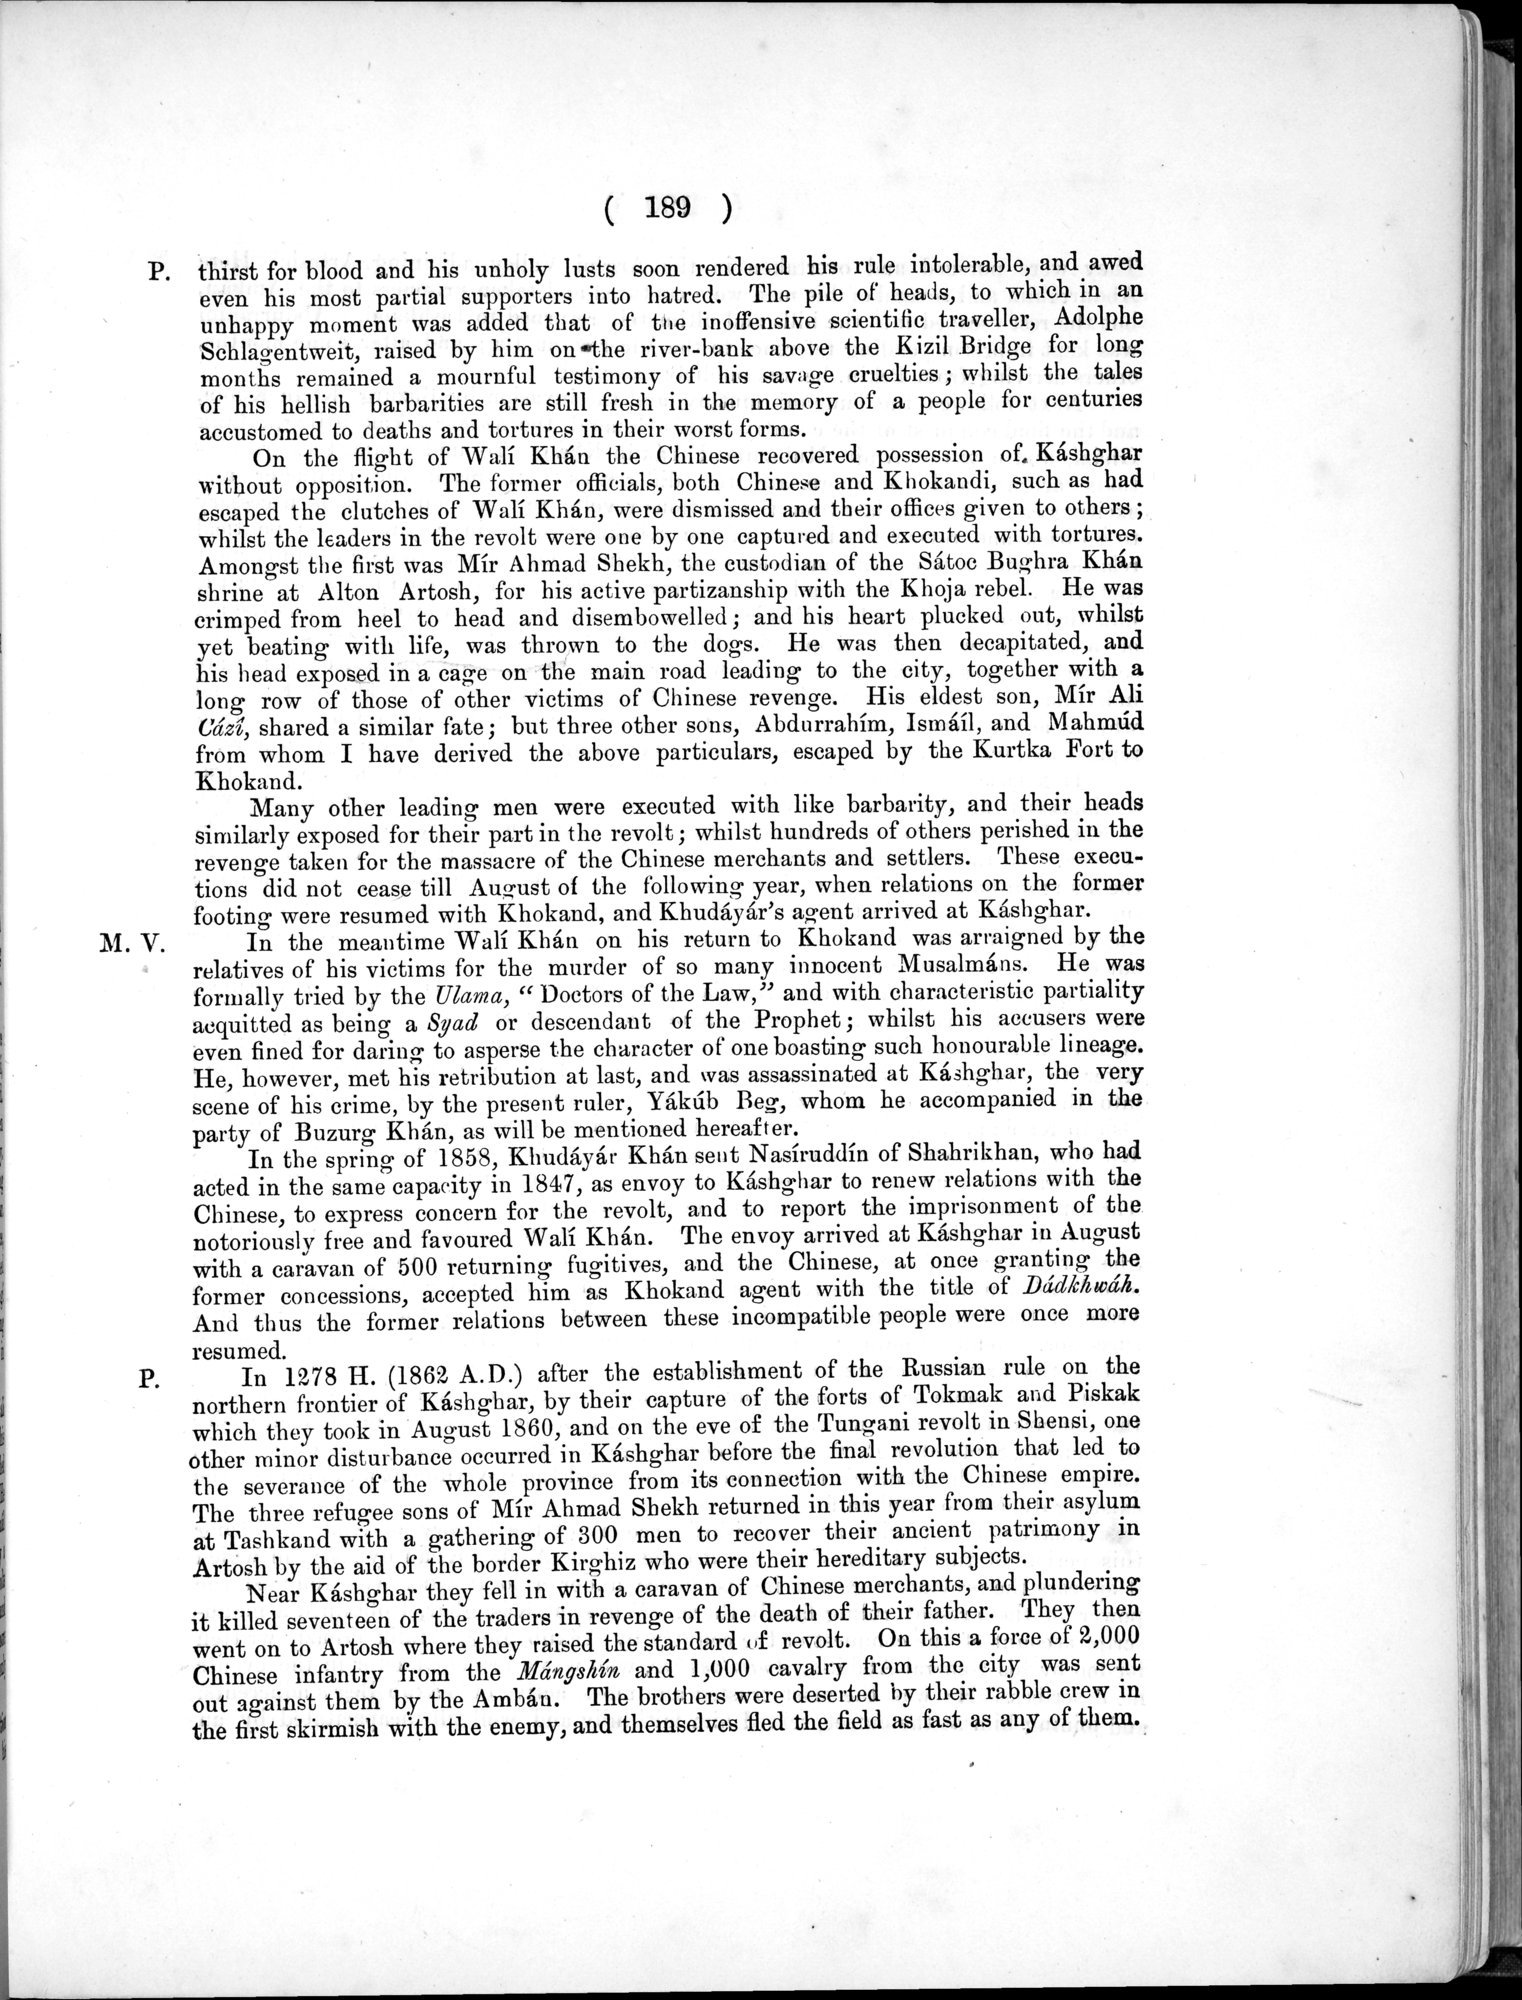 Report of a Mission to Yarkund in 1873 : vol.1 / Page 273 (Grayscale High Resolution Image)